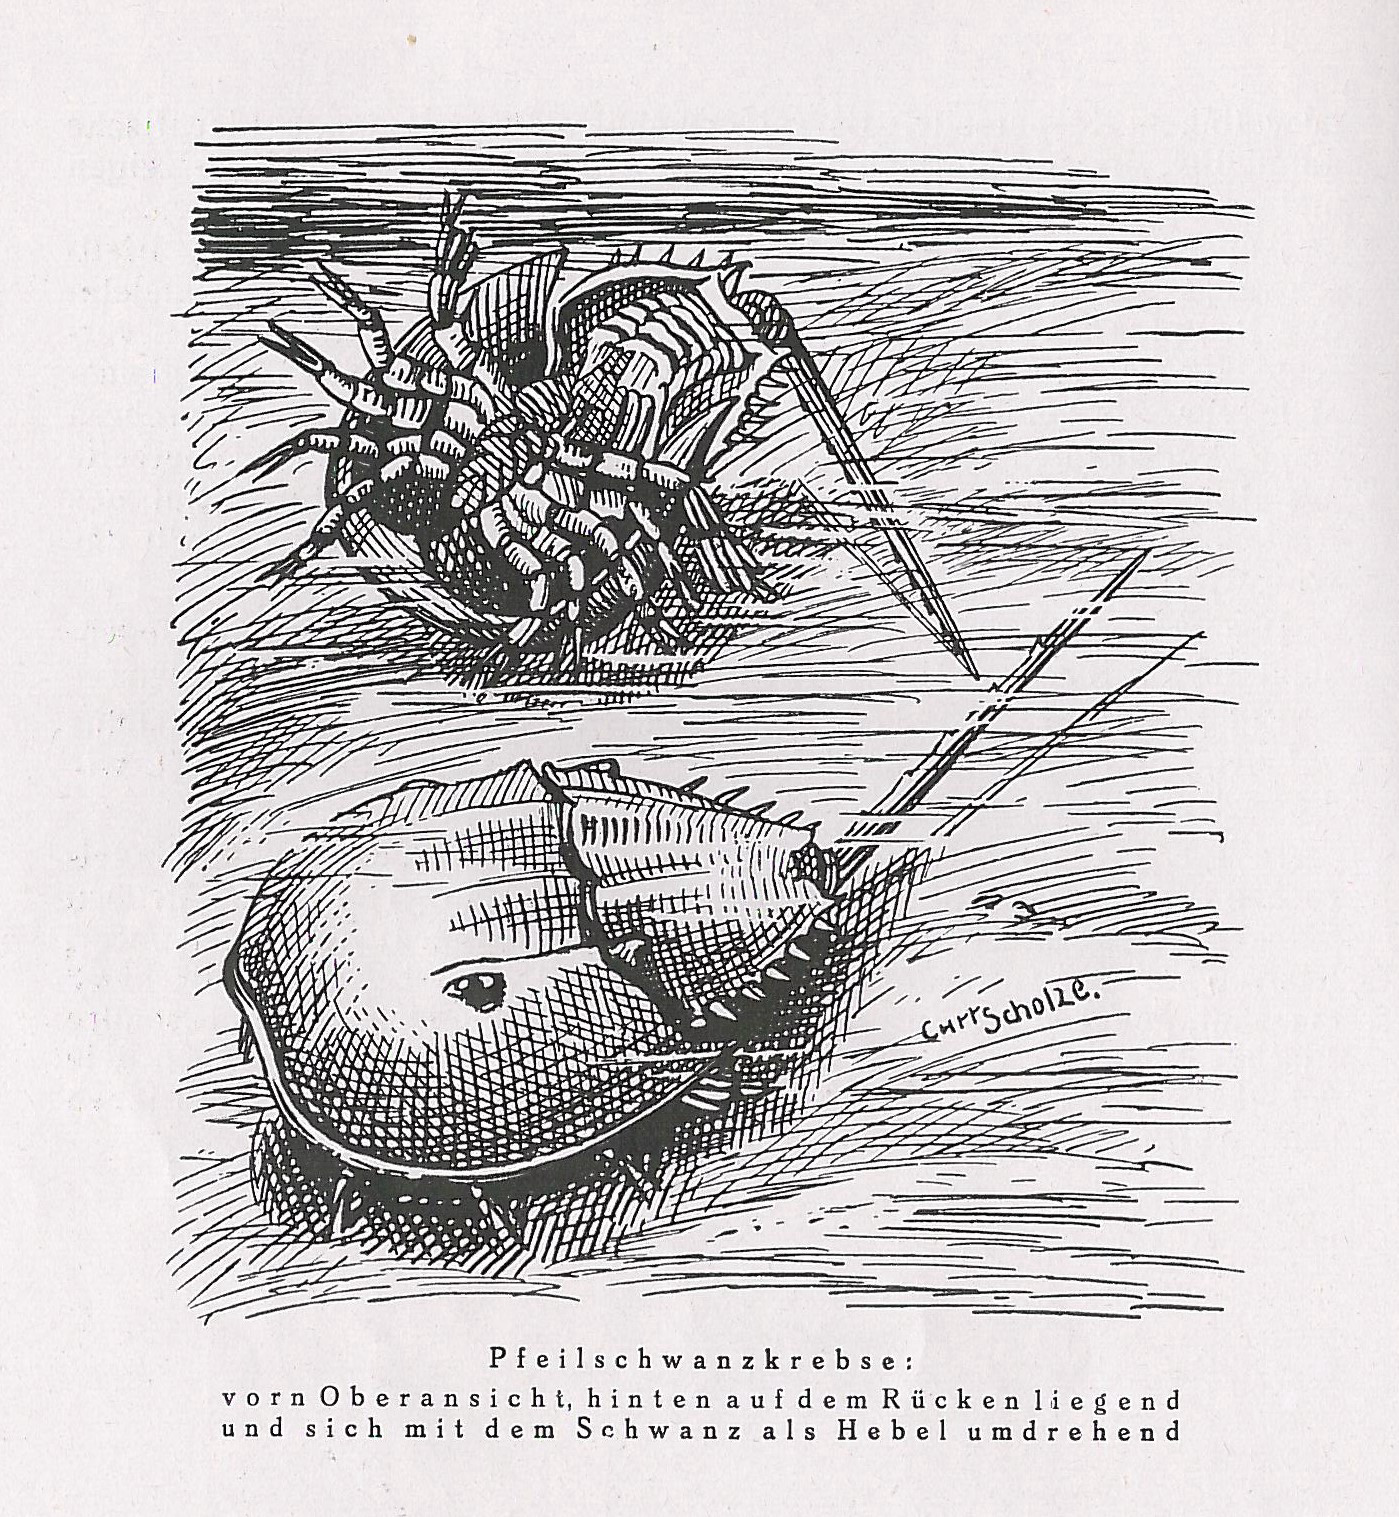 Drawing with caption of three horseshoe crabs on the beach.